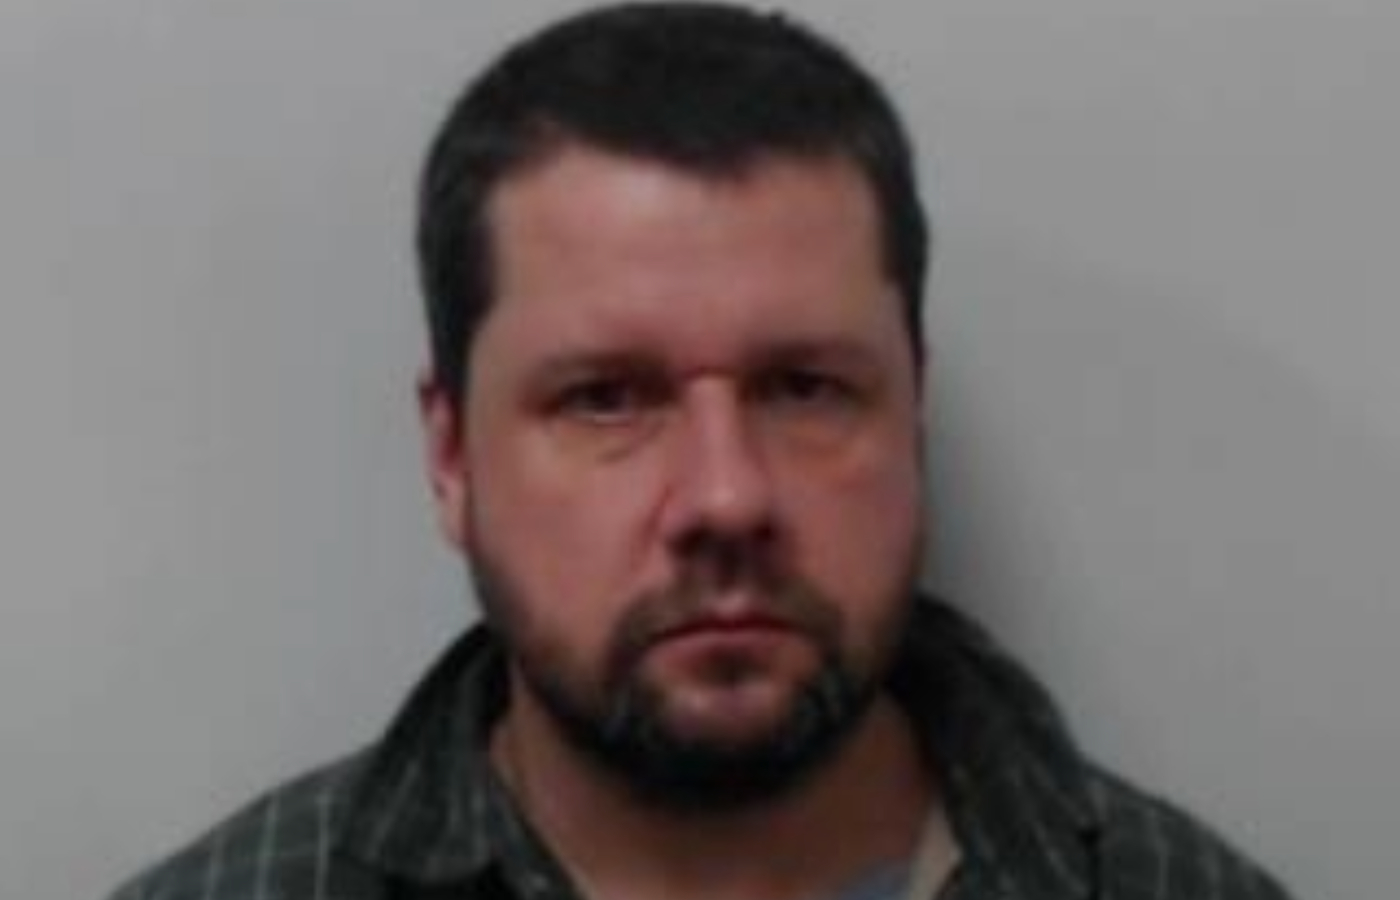 Benjamin Young from Argyll and Bute, was convicted in December of dozens of sexual offences against children.